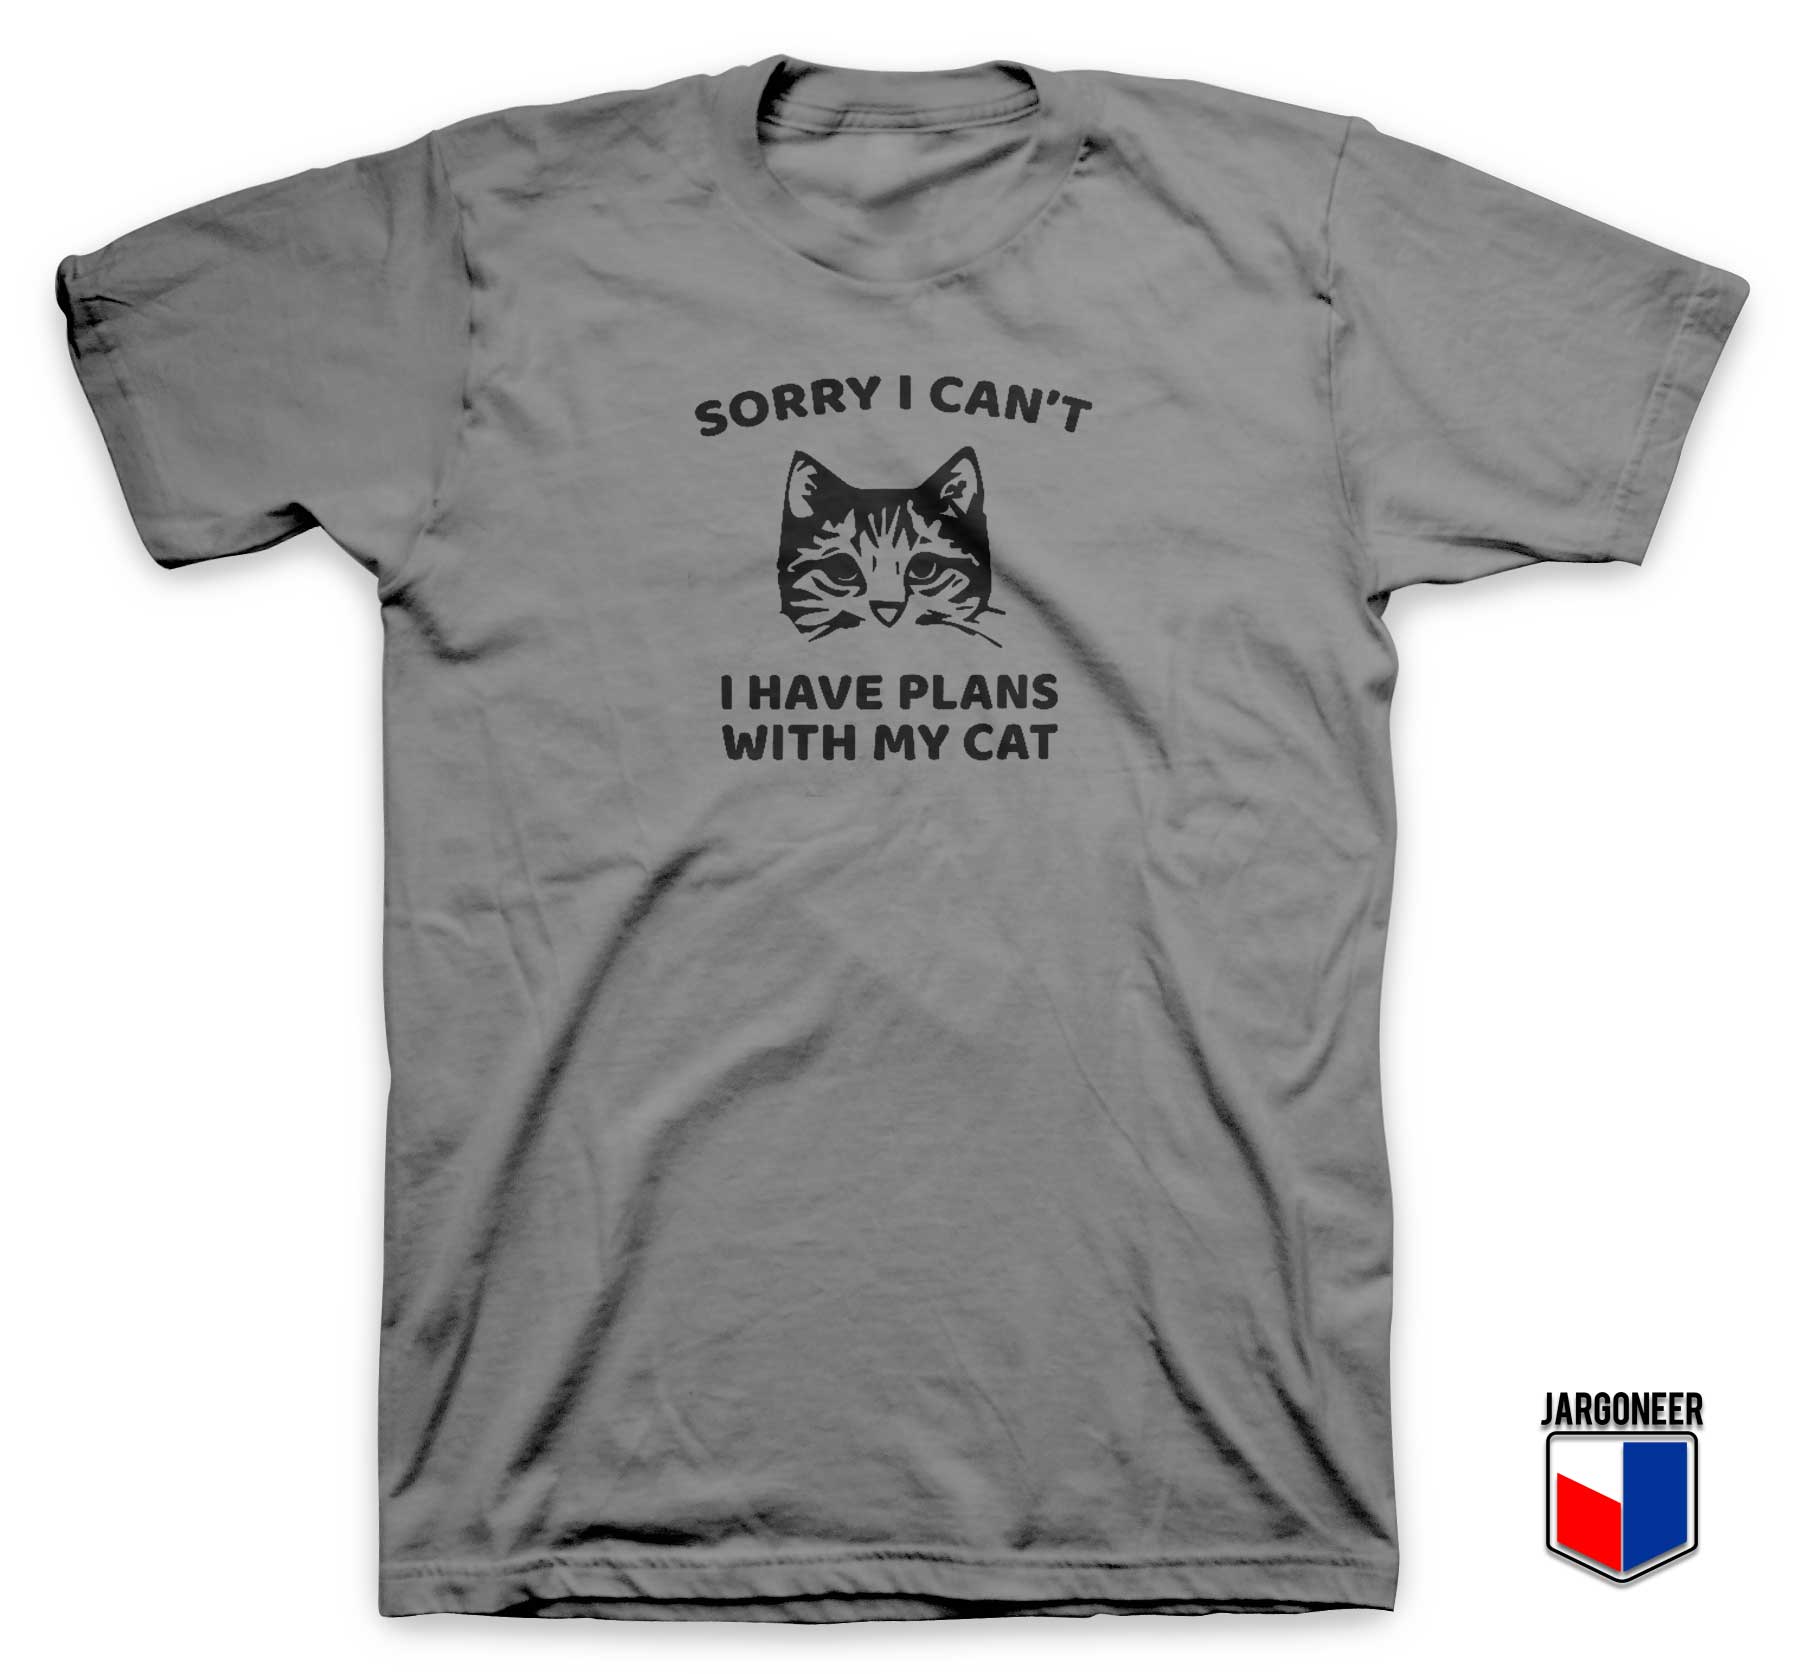 Sorry I Cant I Have Plans With My Cat T Shirt - Shop Unique Graphic Cool Shirt Designs